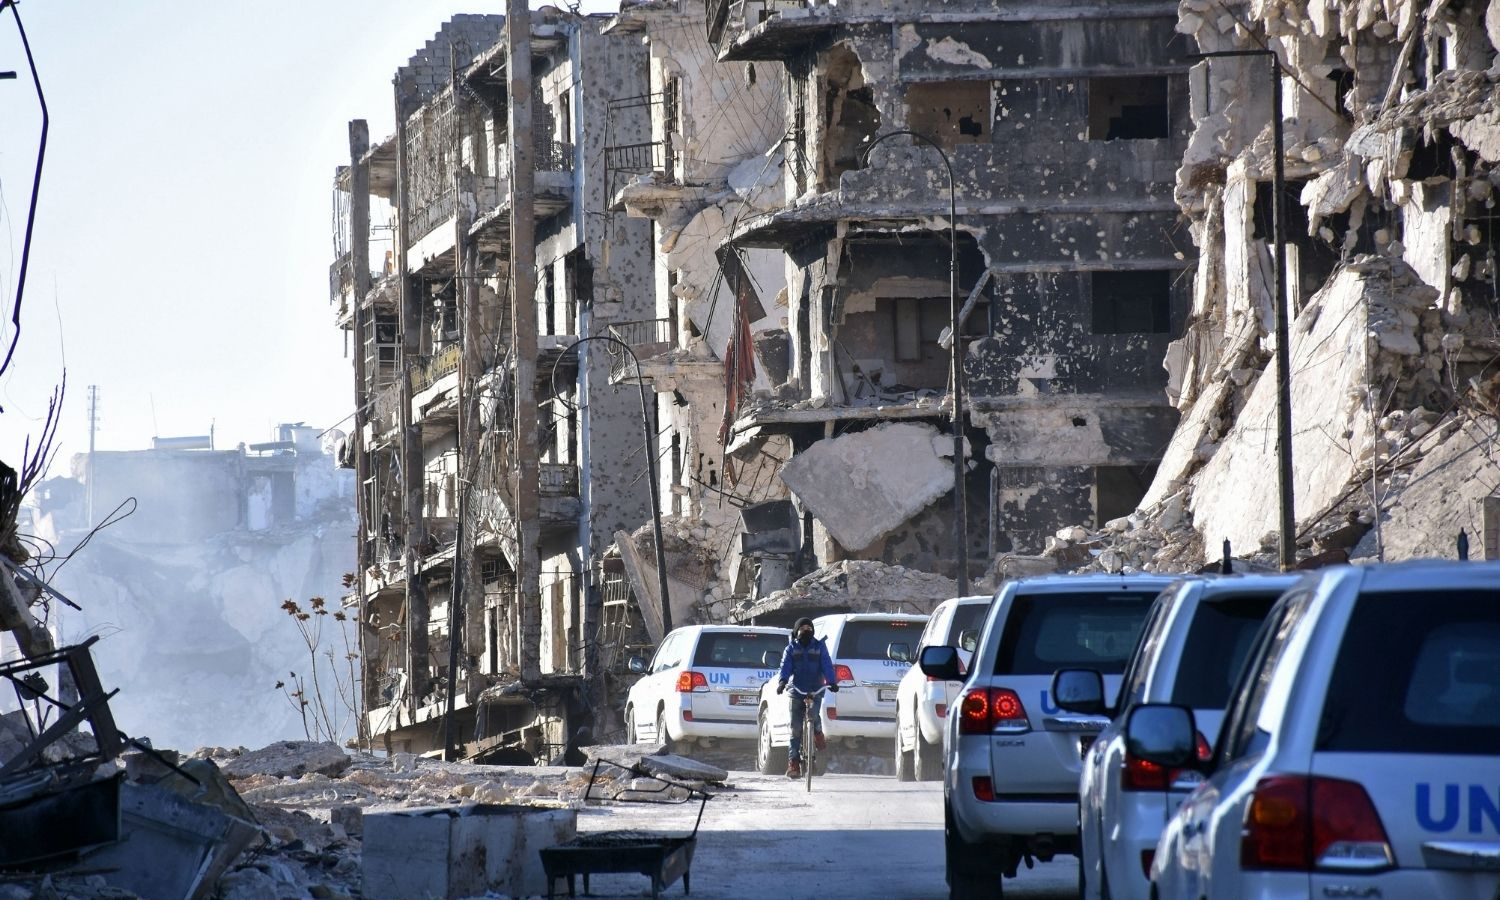 A United Nations convoy in Syria (George Ourfalian / AFP)